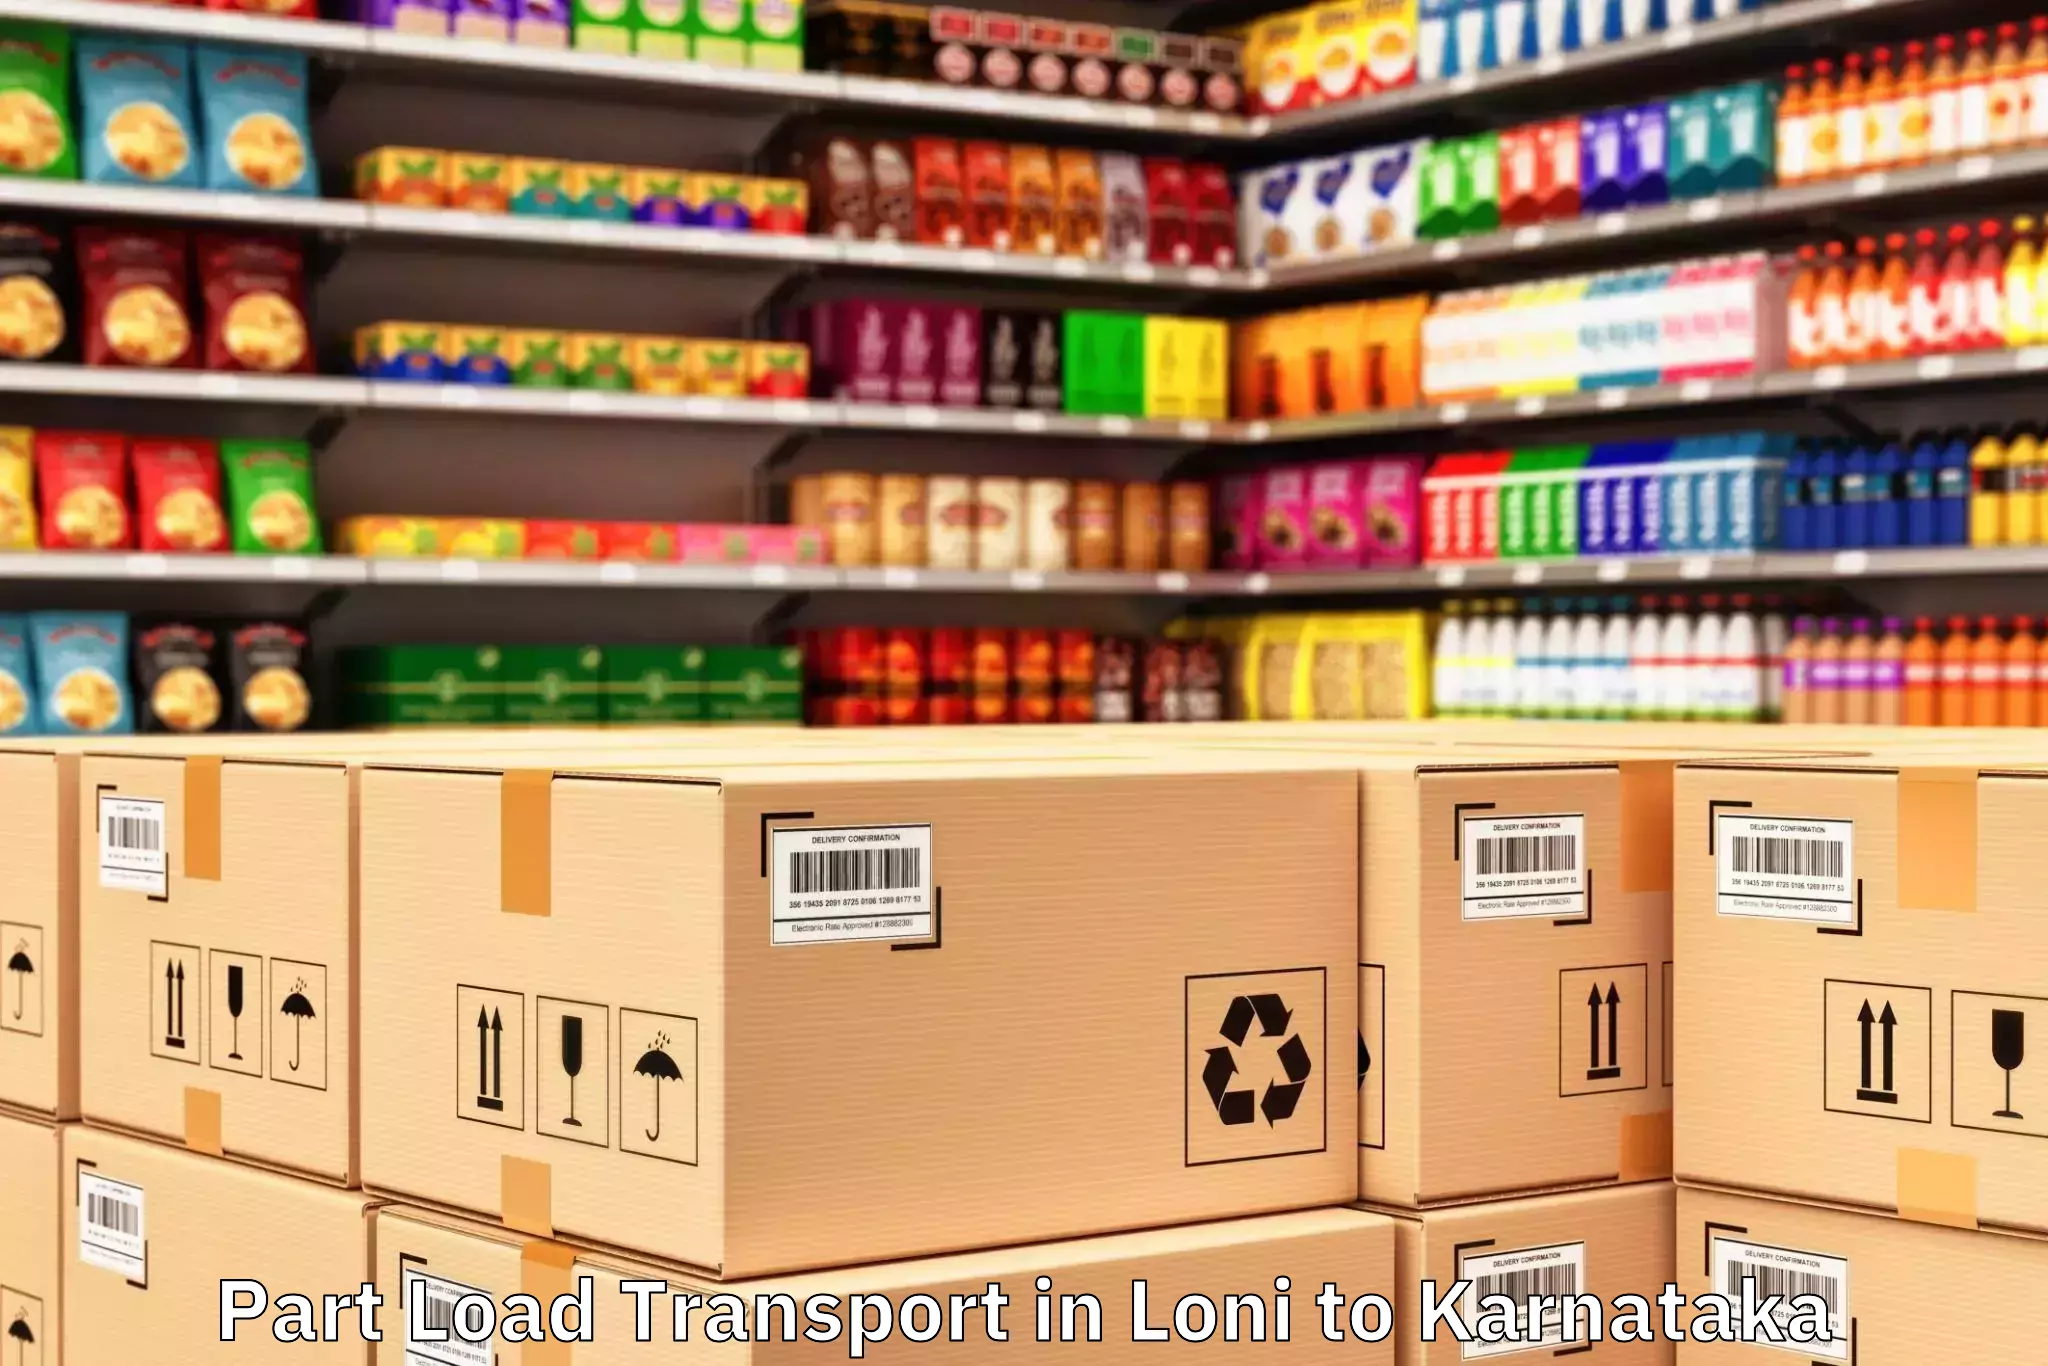 Hassle-Free Loni to Kollegal Part Load Transport